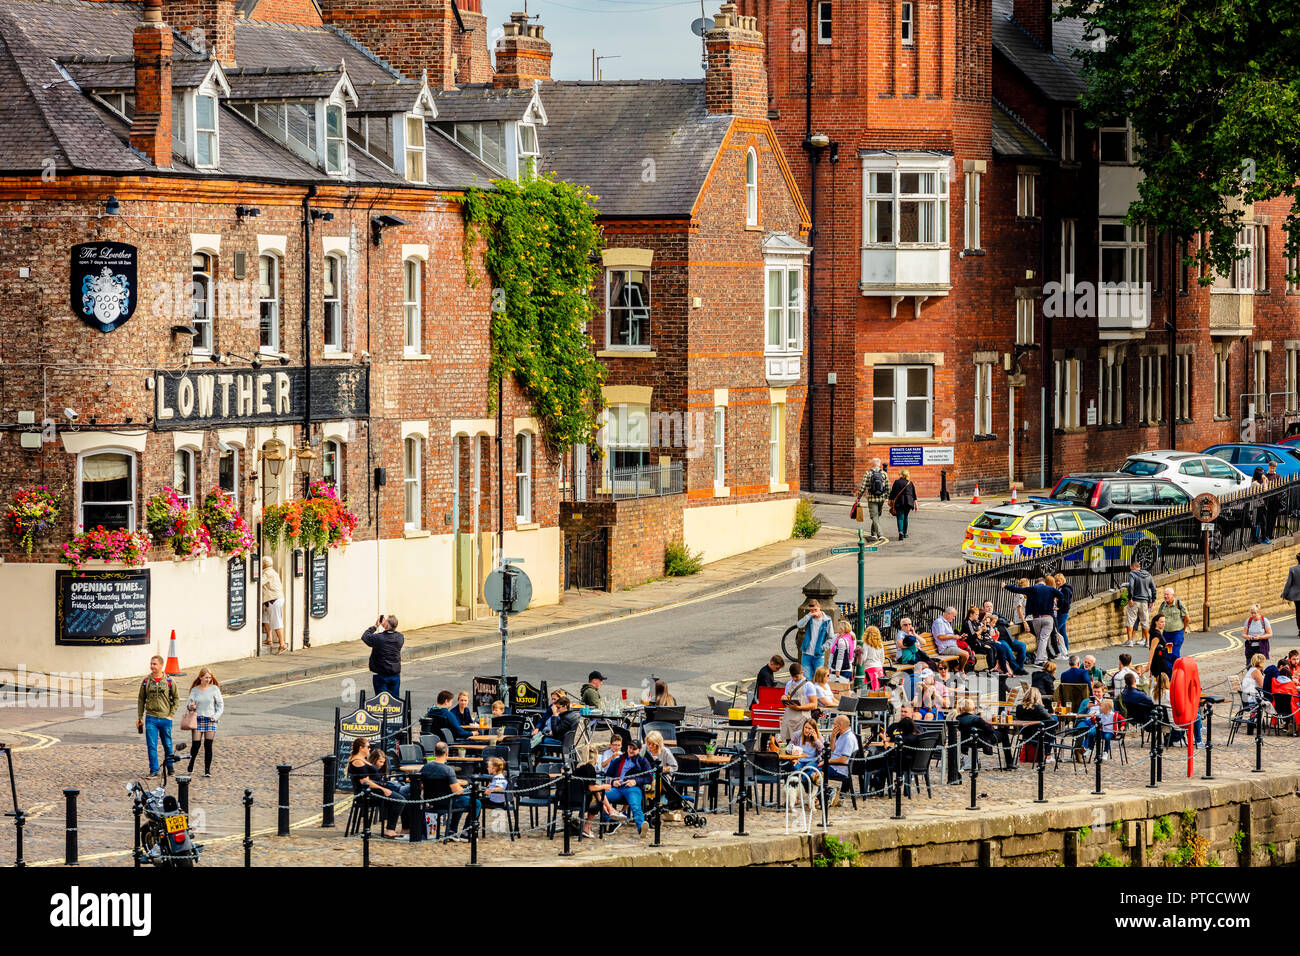 York, UK - August 28 2018: River Ouse urban landscape featuring The Lowther pub and riverside dining social space Stock Photo